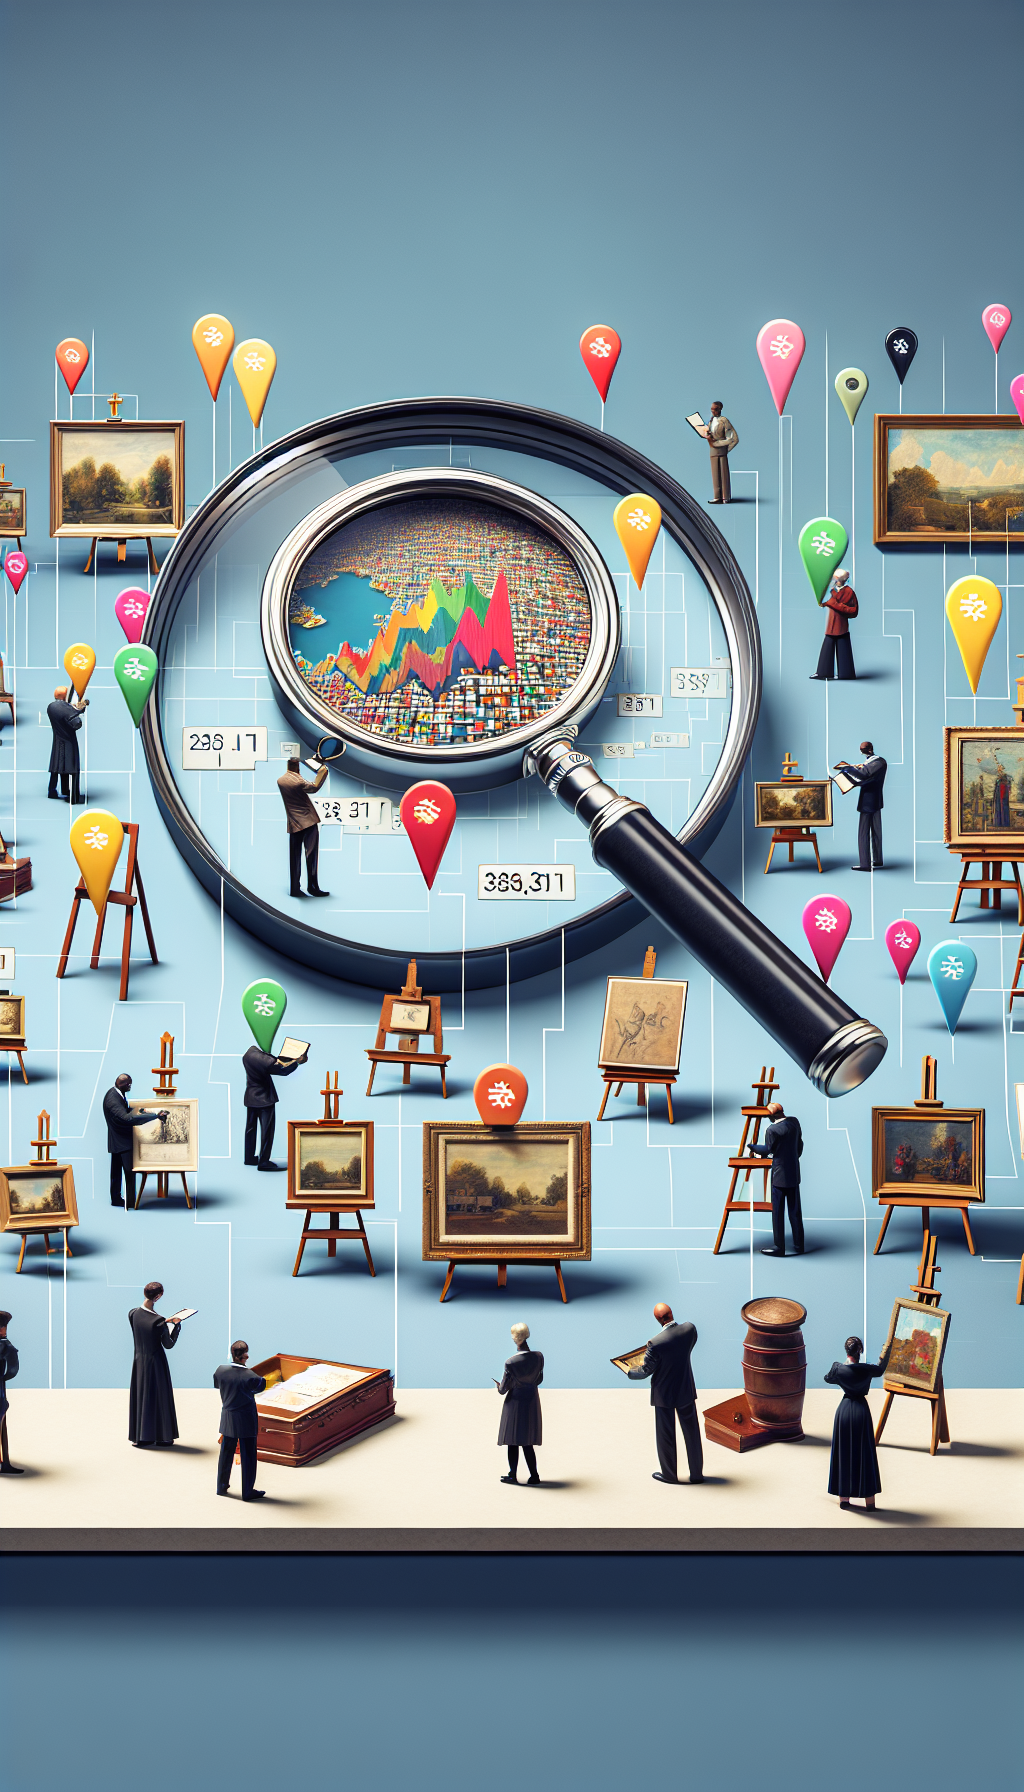 A magnifying glass hovers over a vibrant map, pinpointing an array of local art galleries and auction houses, each marked by a miniature easel or framed painting. Beneath the glass, values of artworks fluctuate like a stock ticker, while art experts with appraisal tools examine a masterpiece at the forefront, symbolizing the quest for nearby fine art valuation.